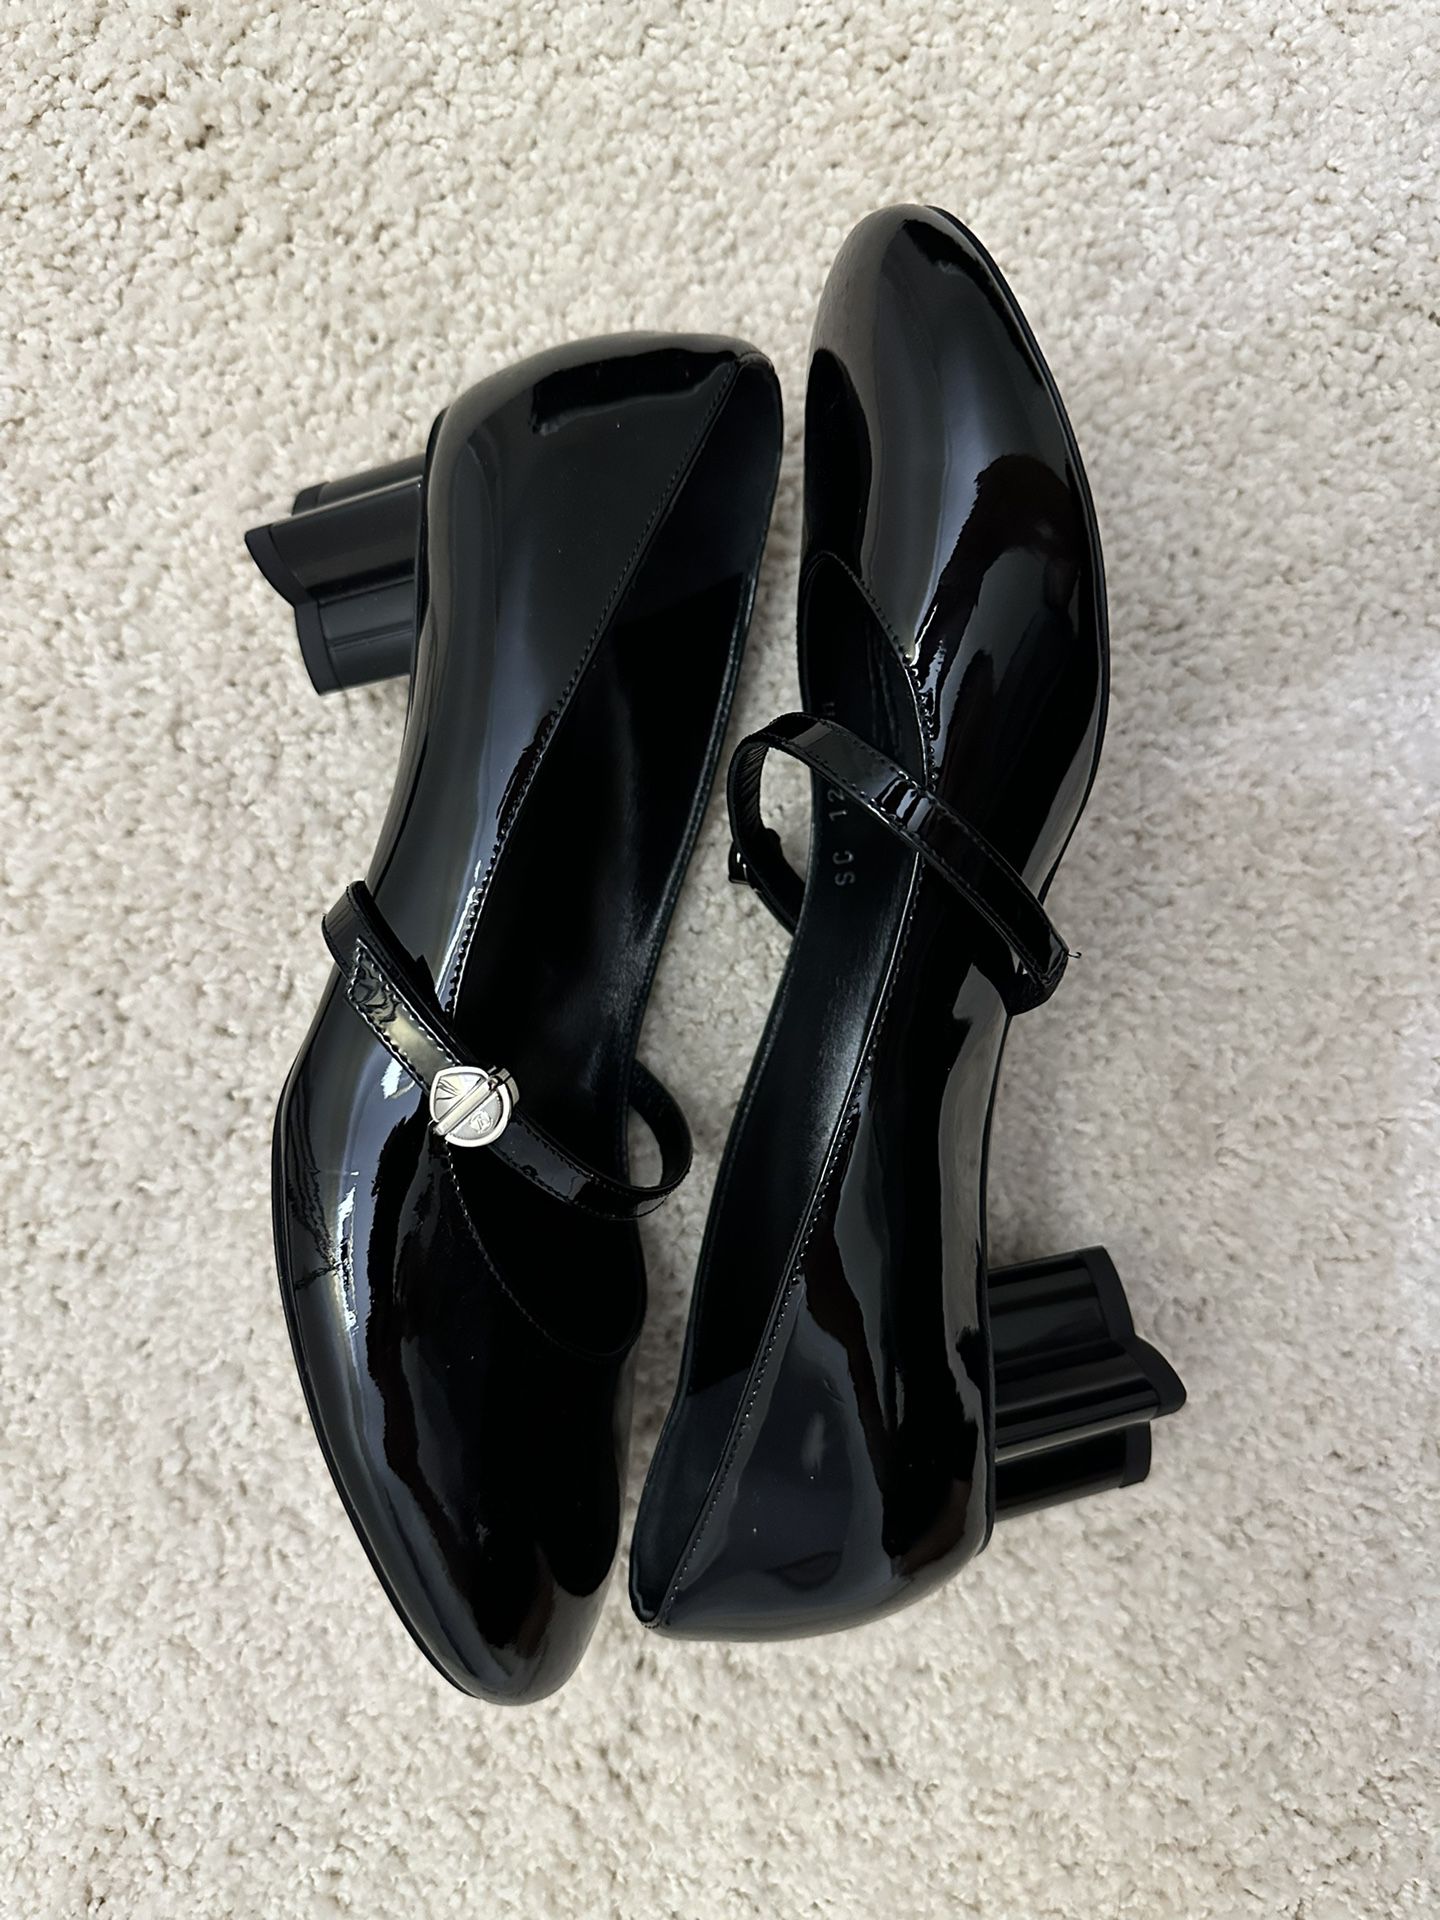 LV Black Shoes for Sale in Frederick, MD - OfferUp